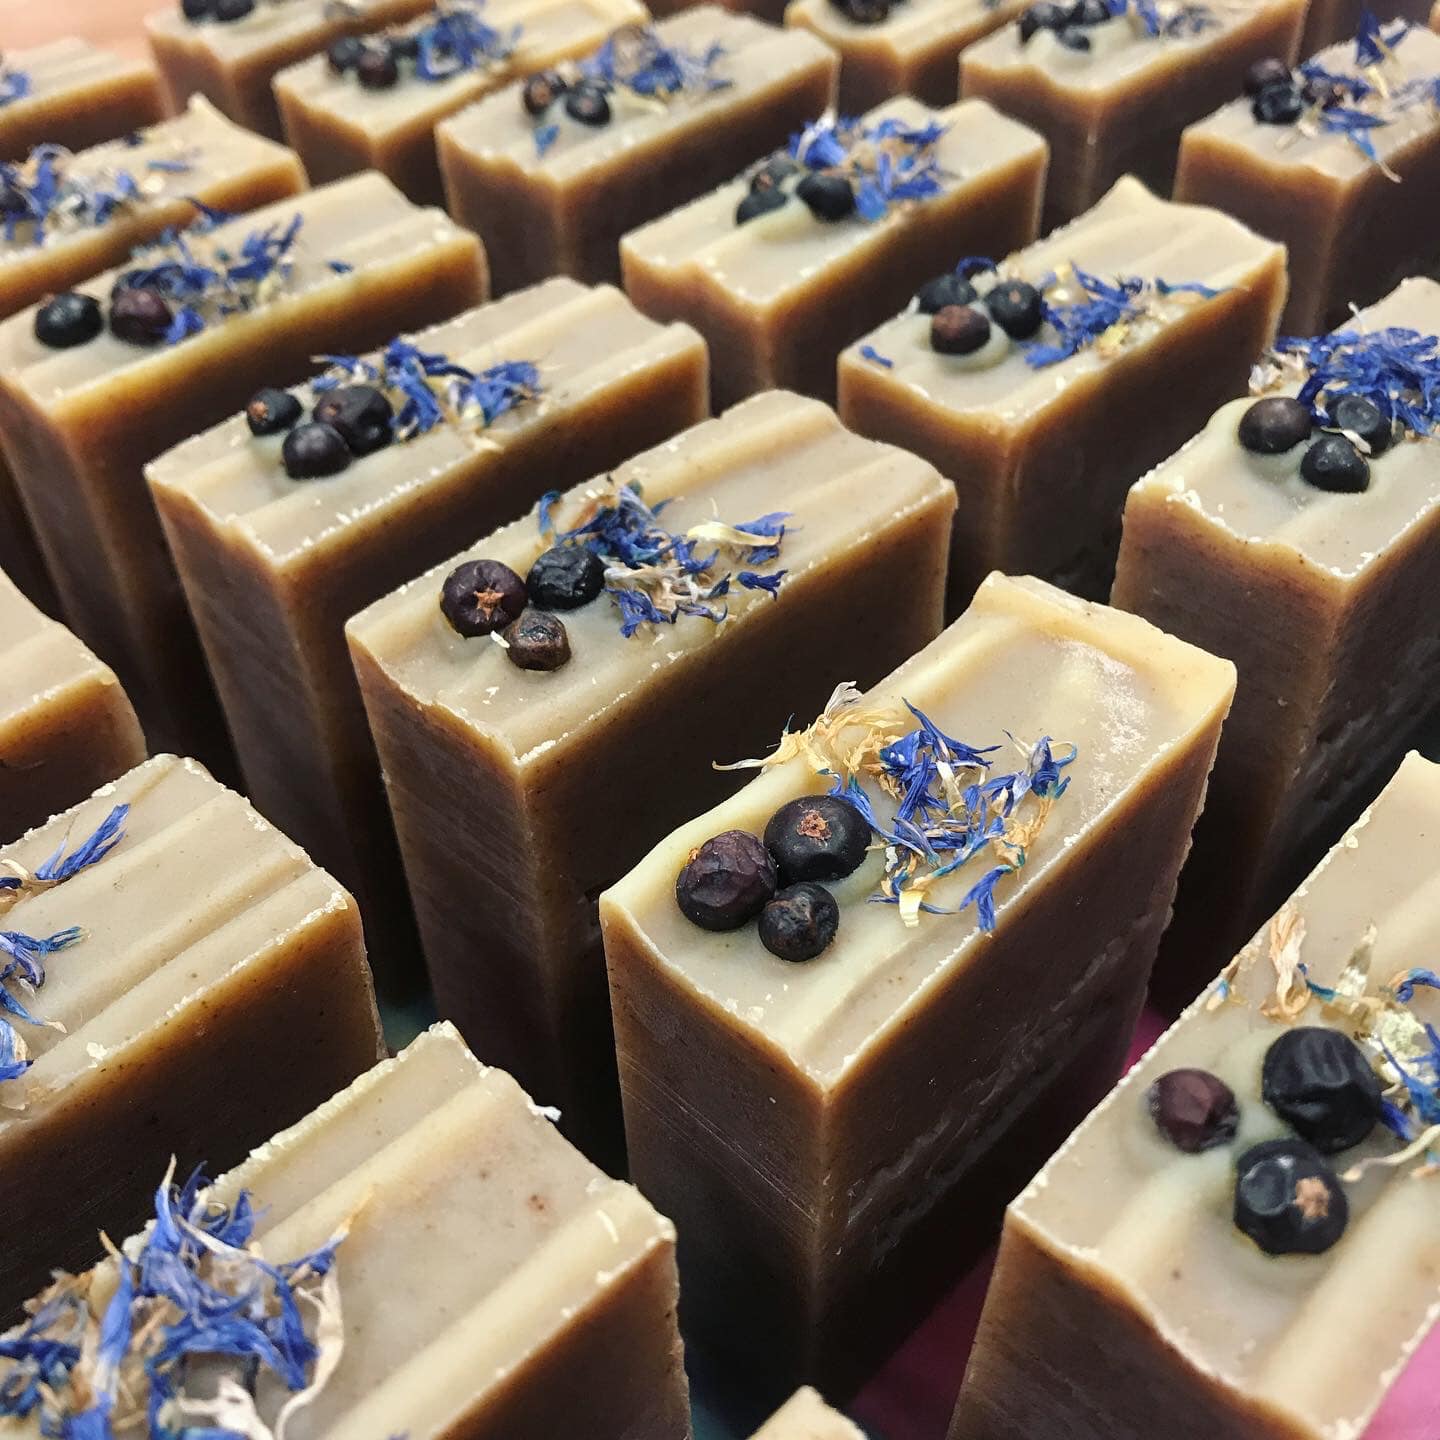 Collection of brown soaps with blue cornflowers and black juniper berries on top or each bar spread out to dry